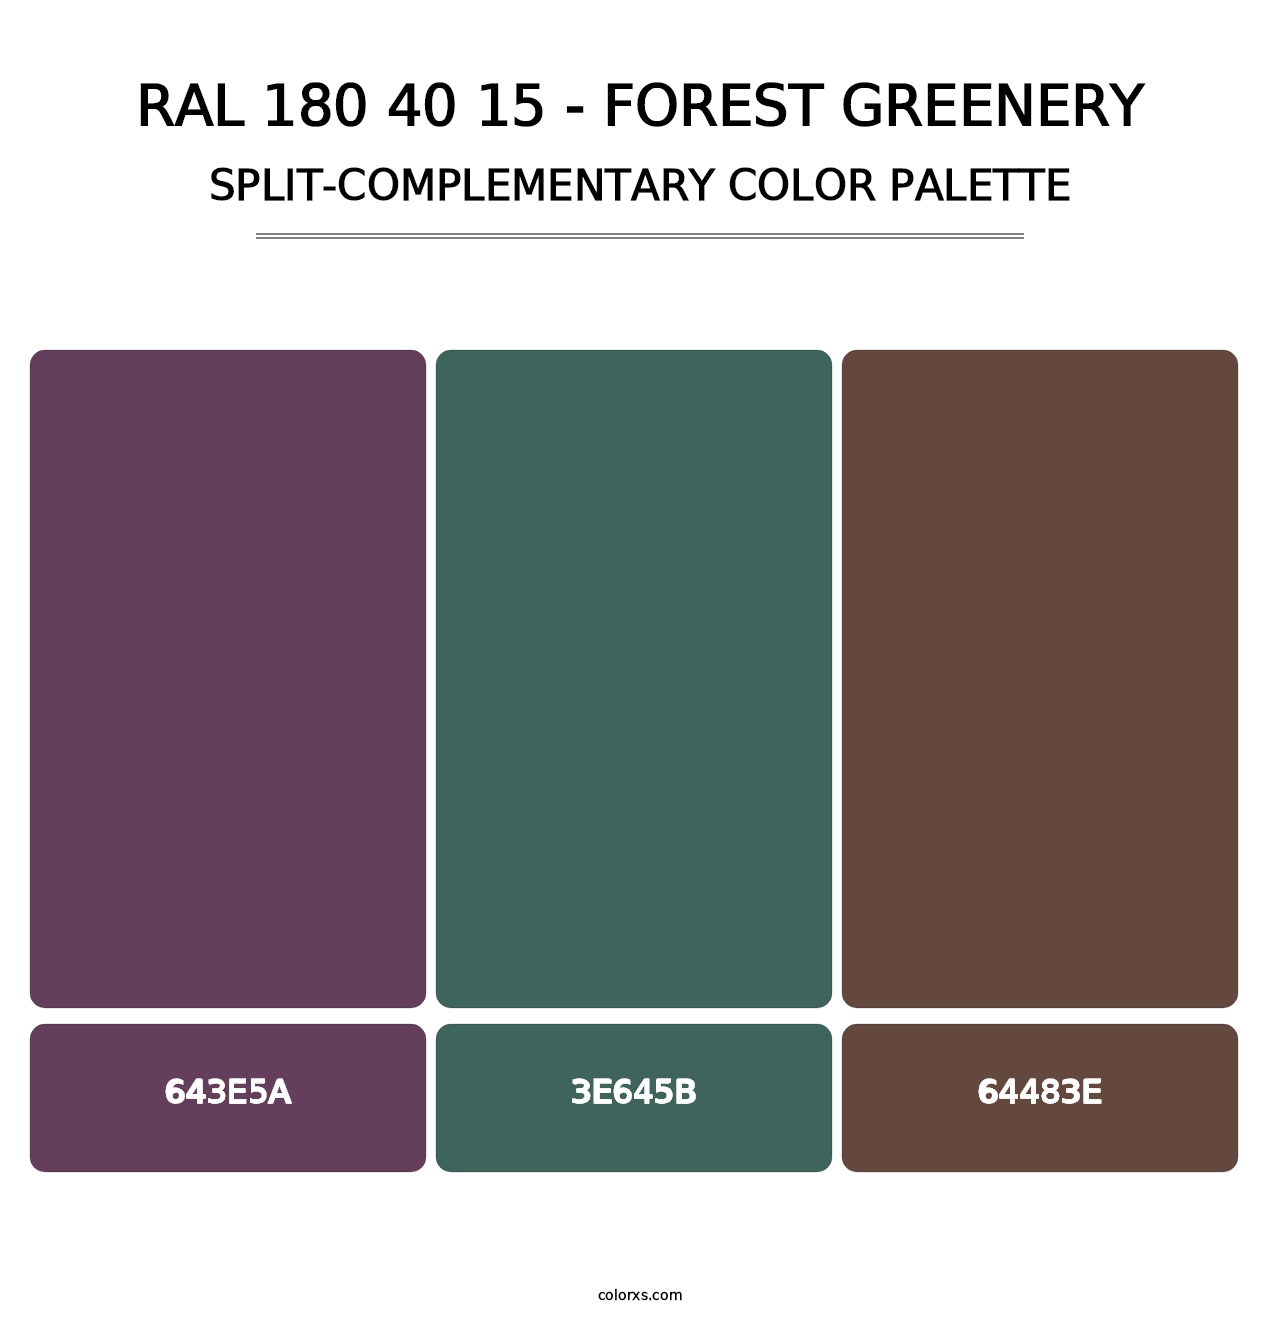 RAL 180 40 15 - Forest Greenery - Split-Complementary Color Palette